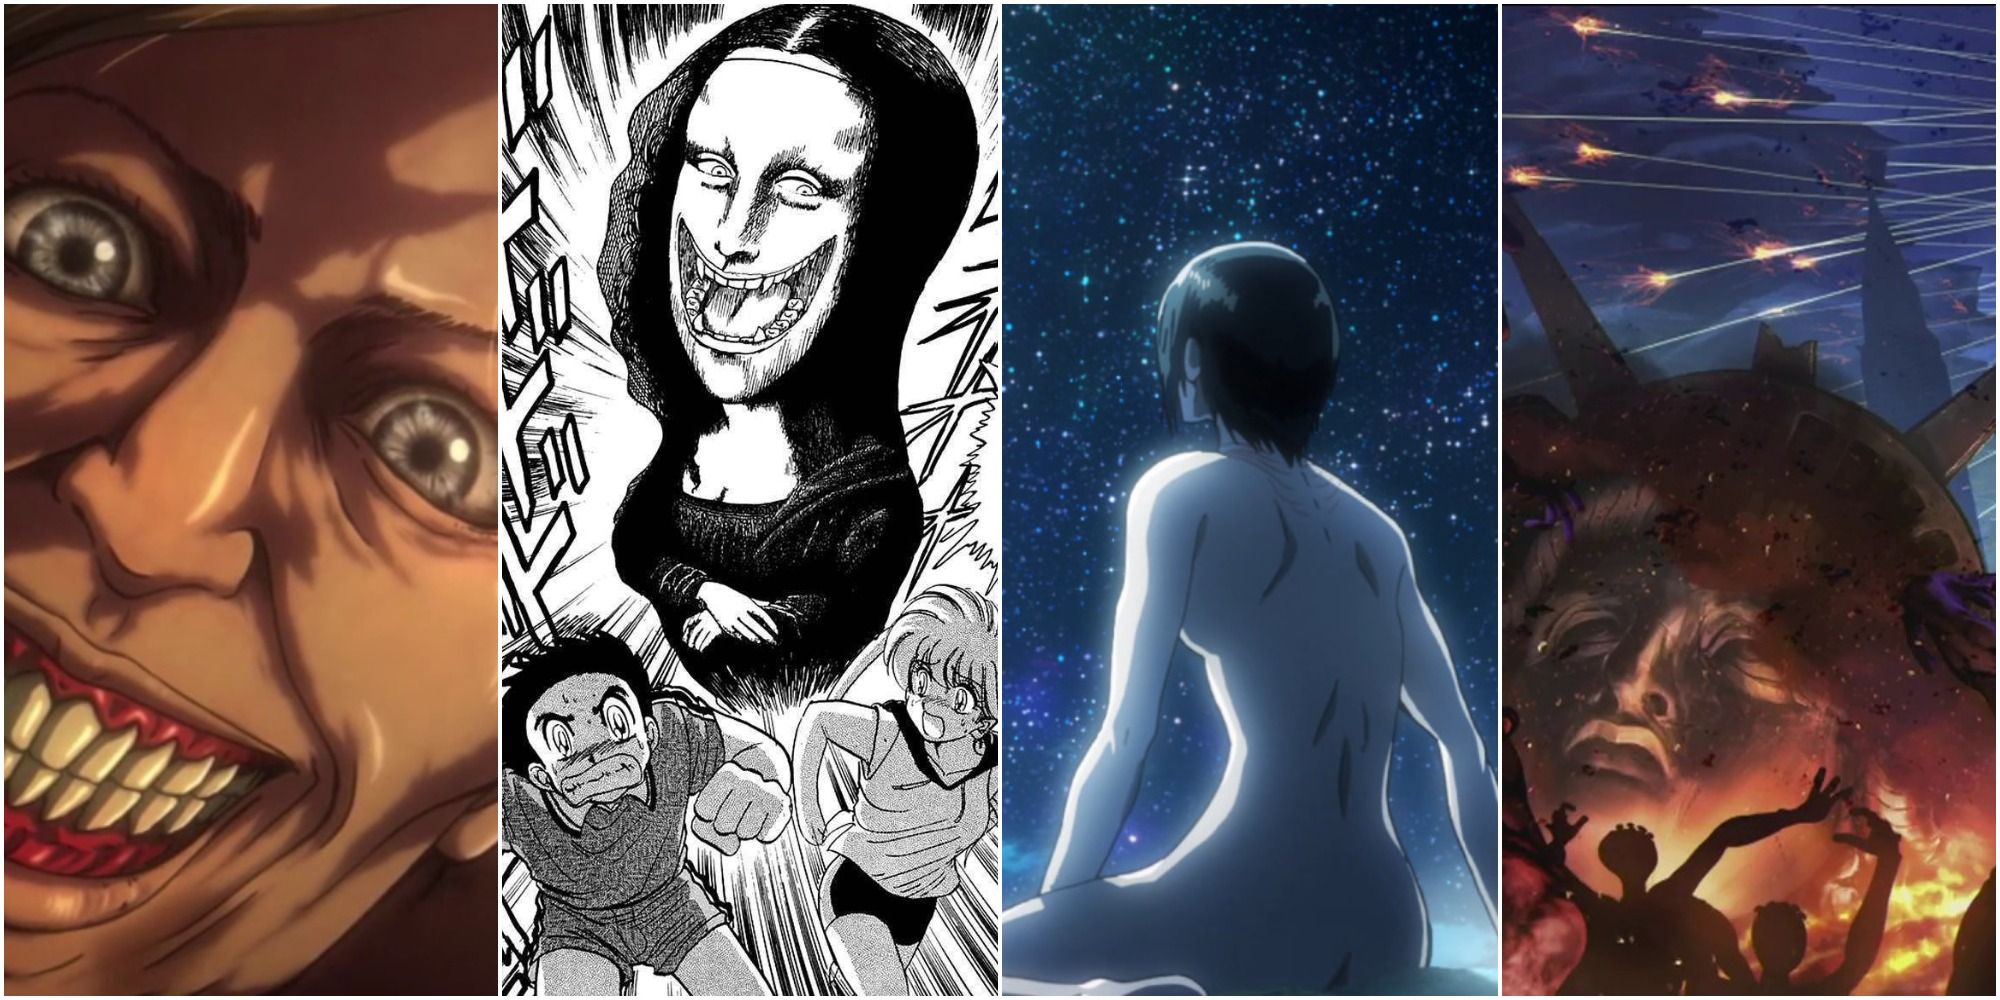 Attack on Titan influences split image large menacing grinning face, two manga characters running from a laughing figure, an anime character looking up at the starry sky and characters waving arms as a statue is eemingly struck by flaming projectiles